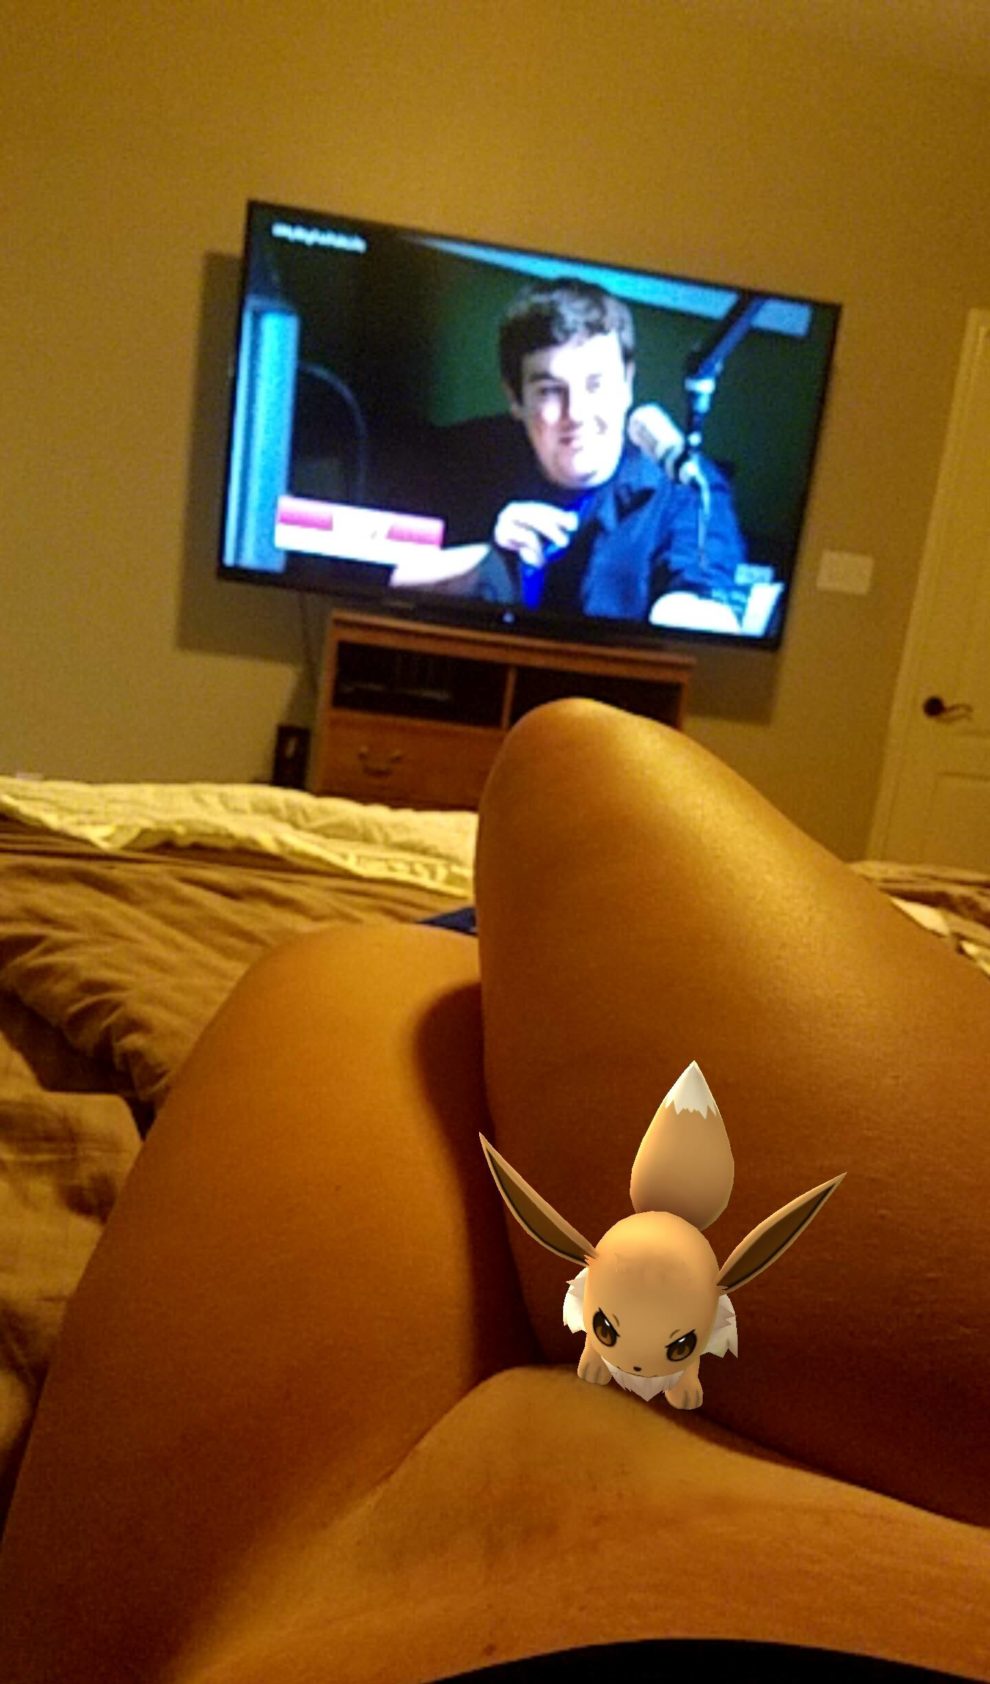 It's been awhile......but I was playing Pokémon go last night and then this happened. [F]